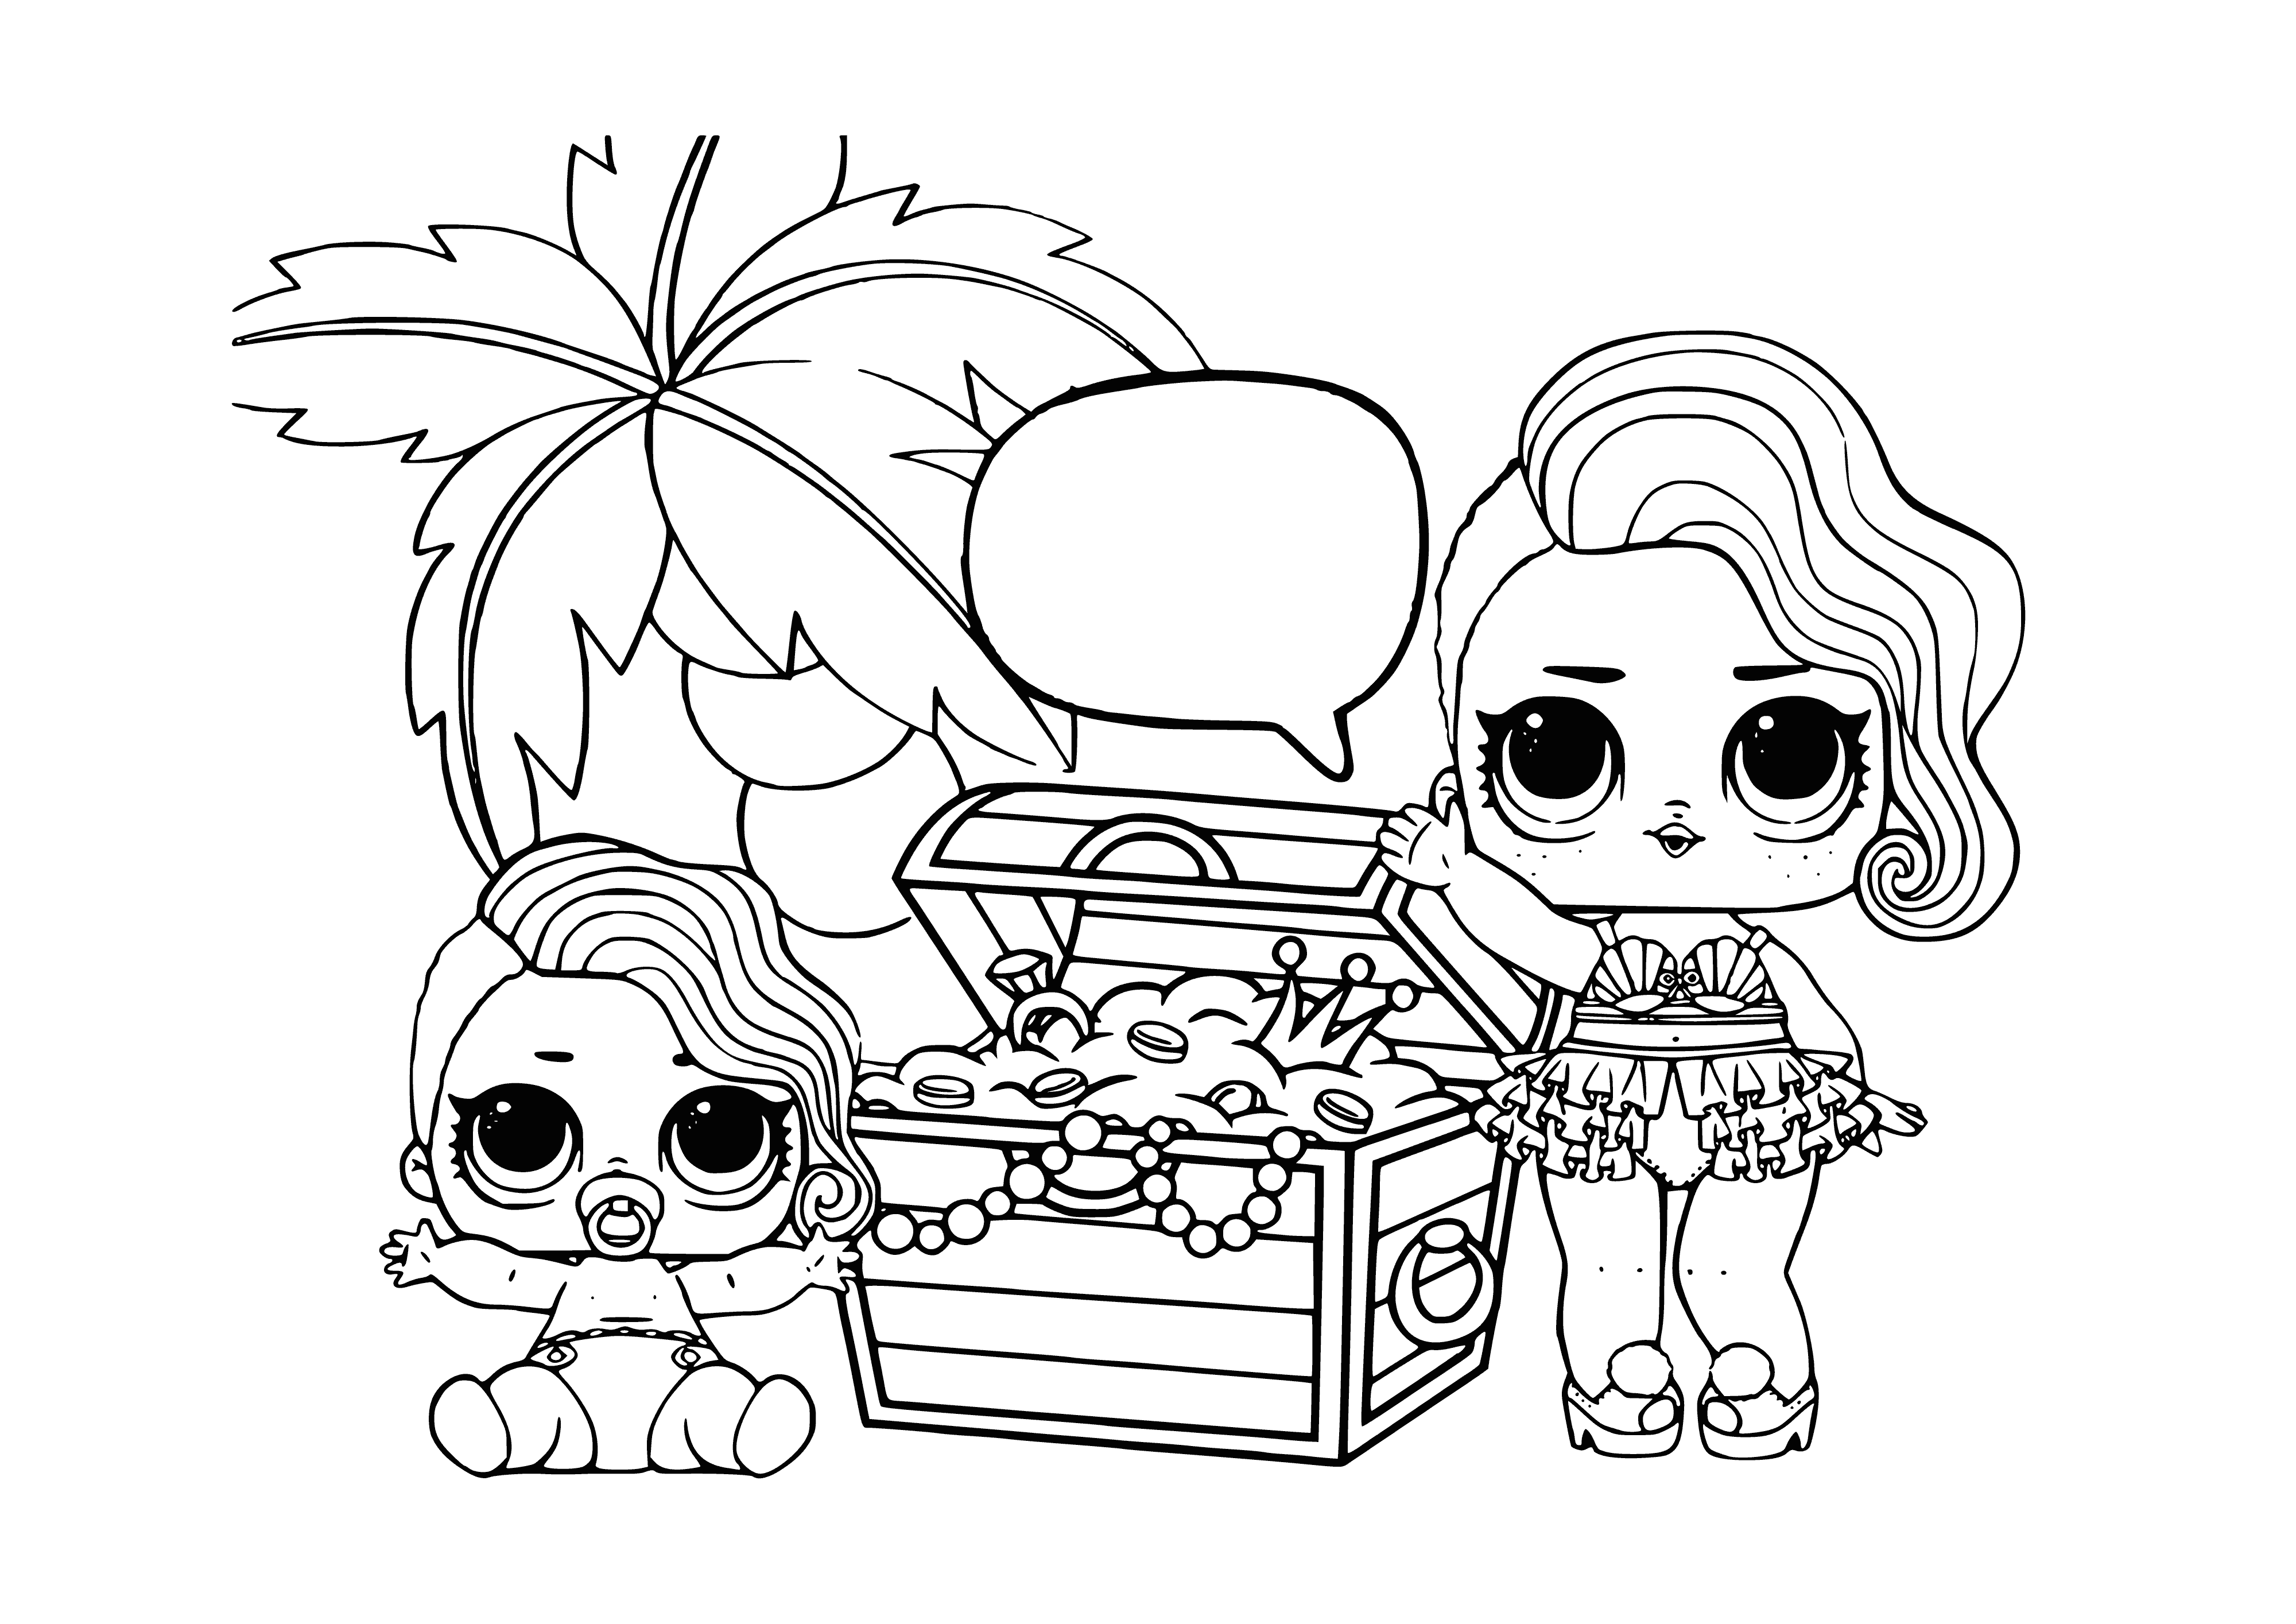 coloring page: Mermaids & octopus surround a treasure trove in the center of the page - gold coins, jeweled necklace, pearl, seashell & starfish!